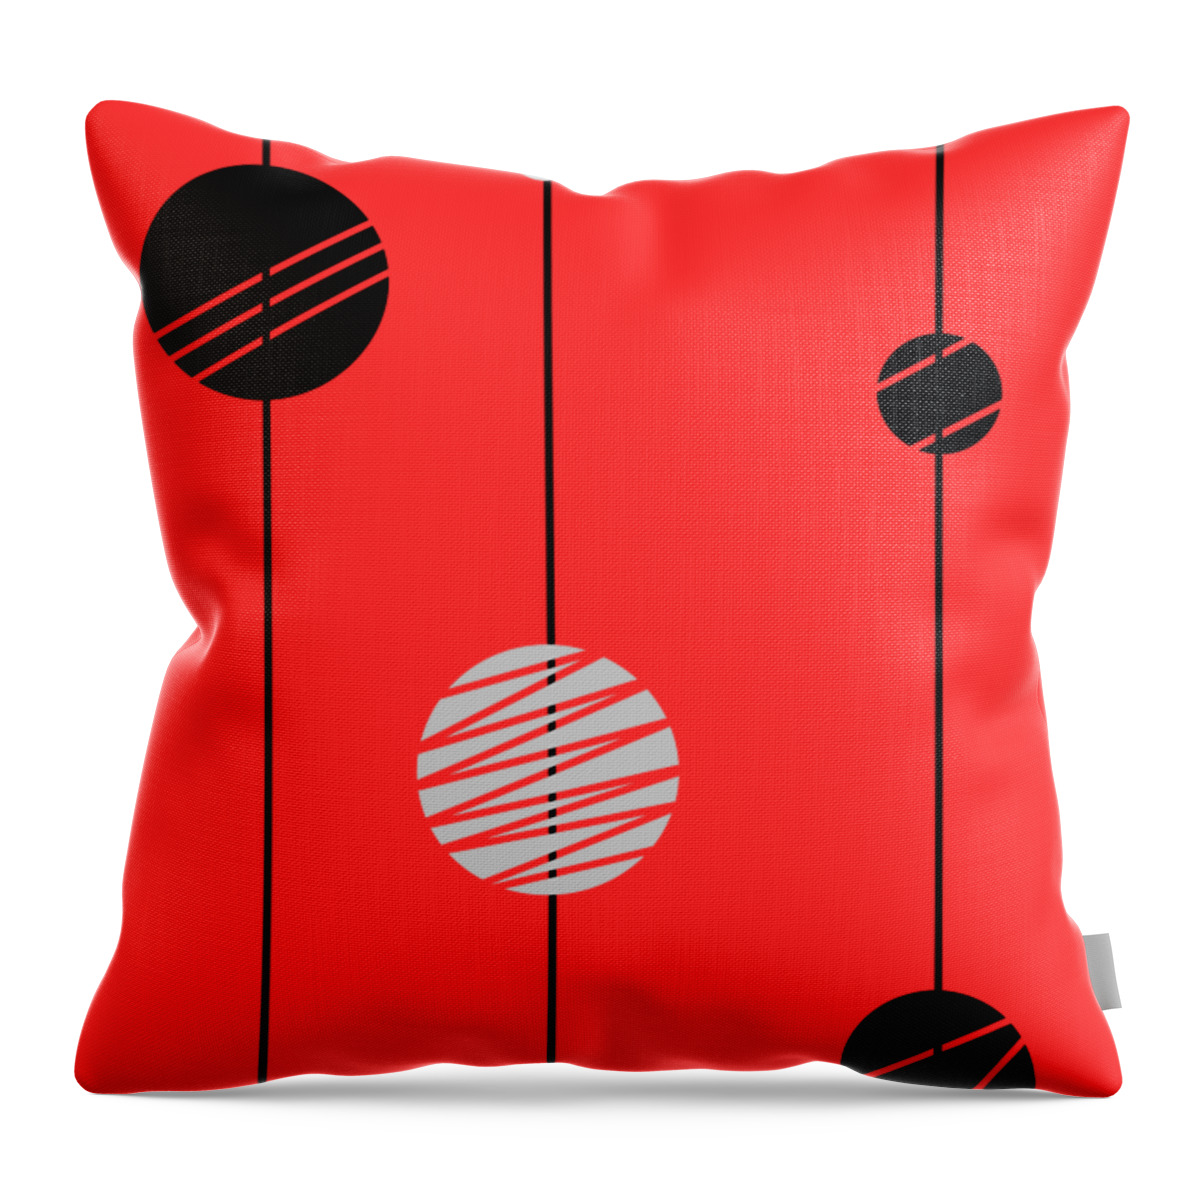 Richard Reeve Throw Pillow featuring the digital art Tracks 1 by Richard Reeve